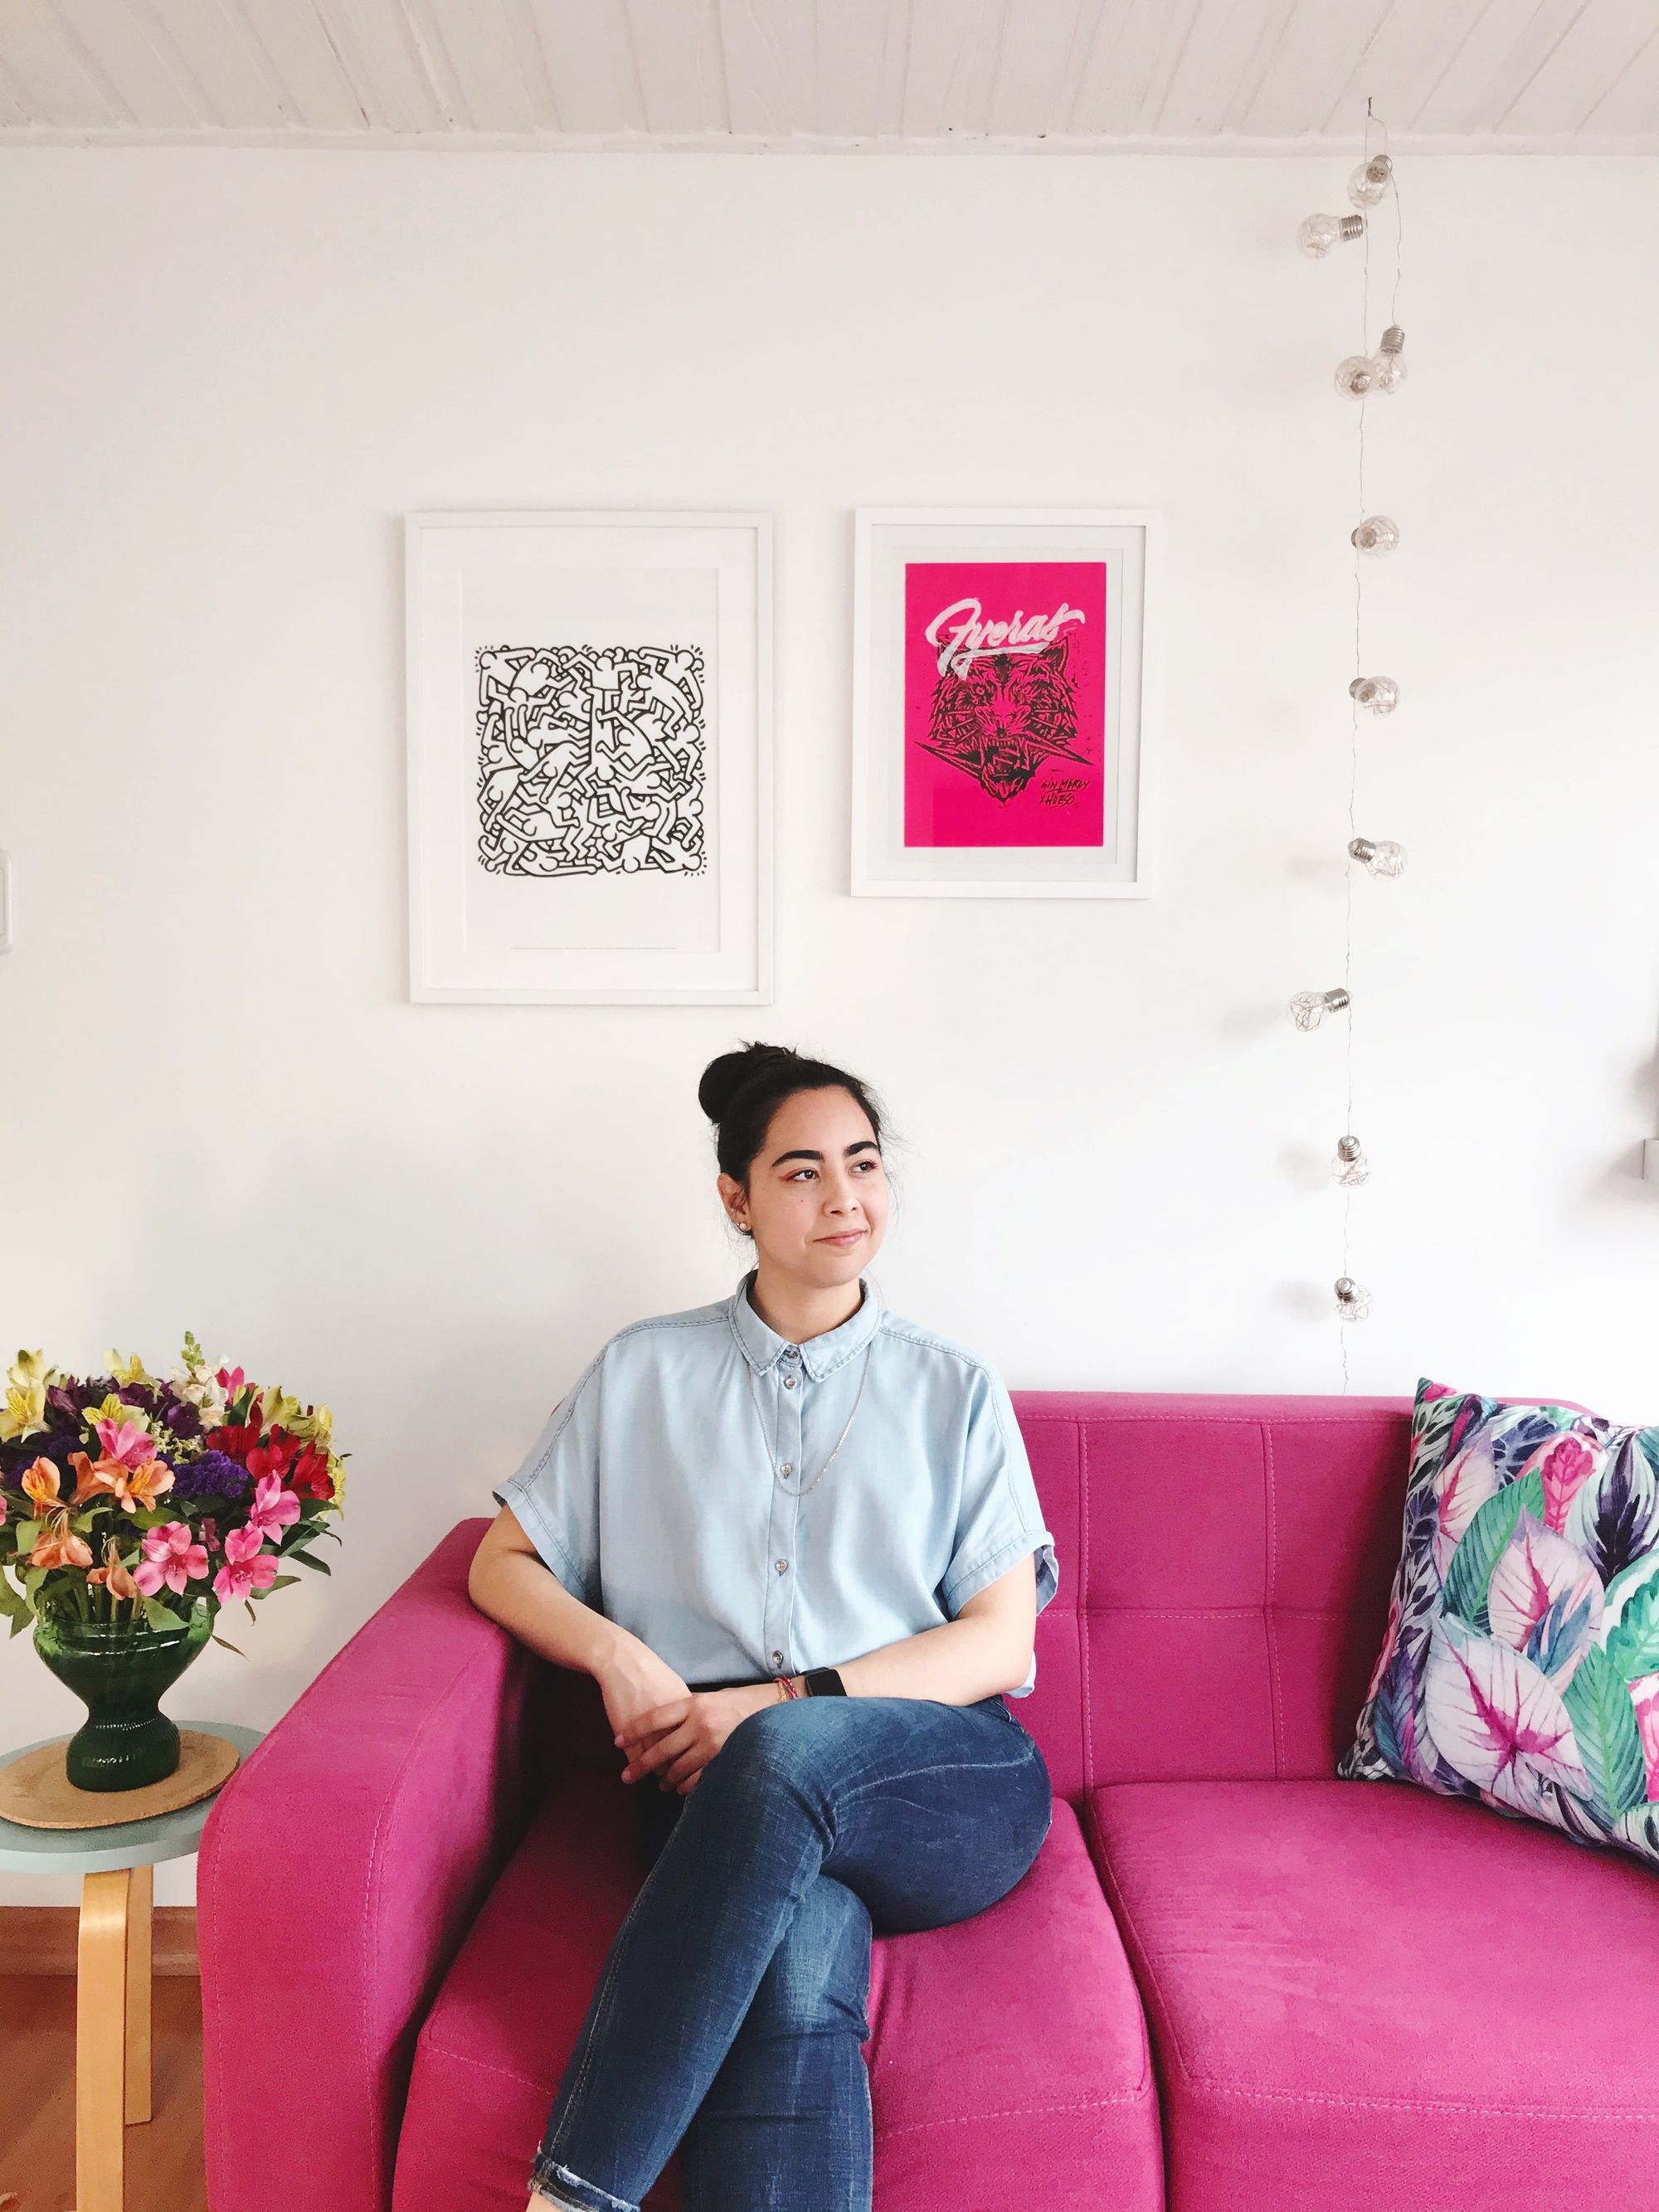 Nubikini, a lettering artist from Venezuela, in her apartment in Bogotá, Colombia